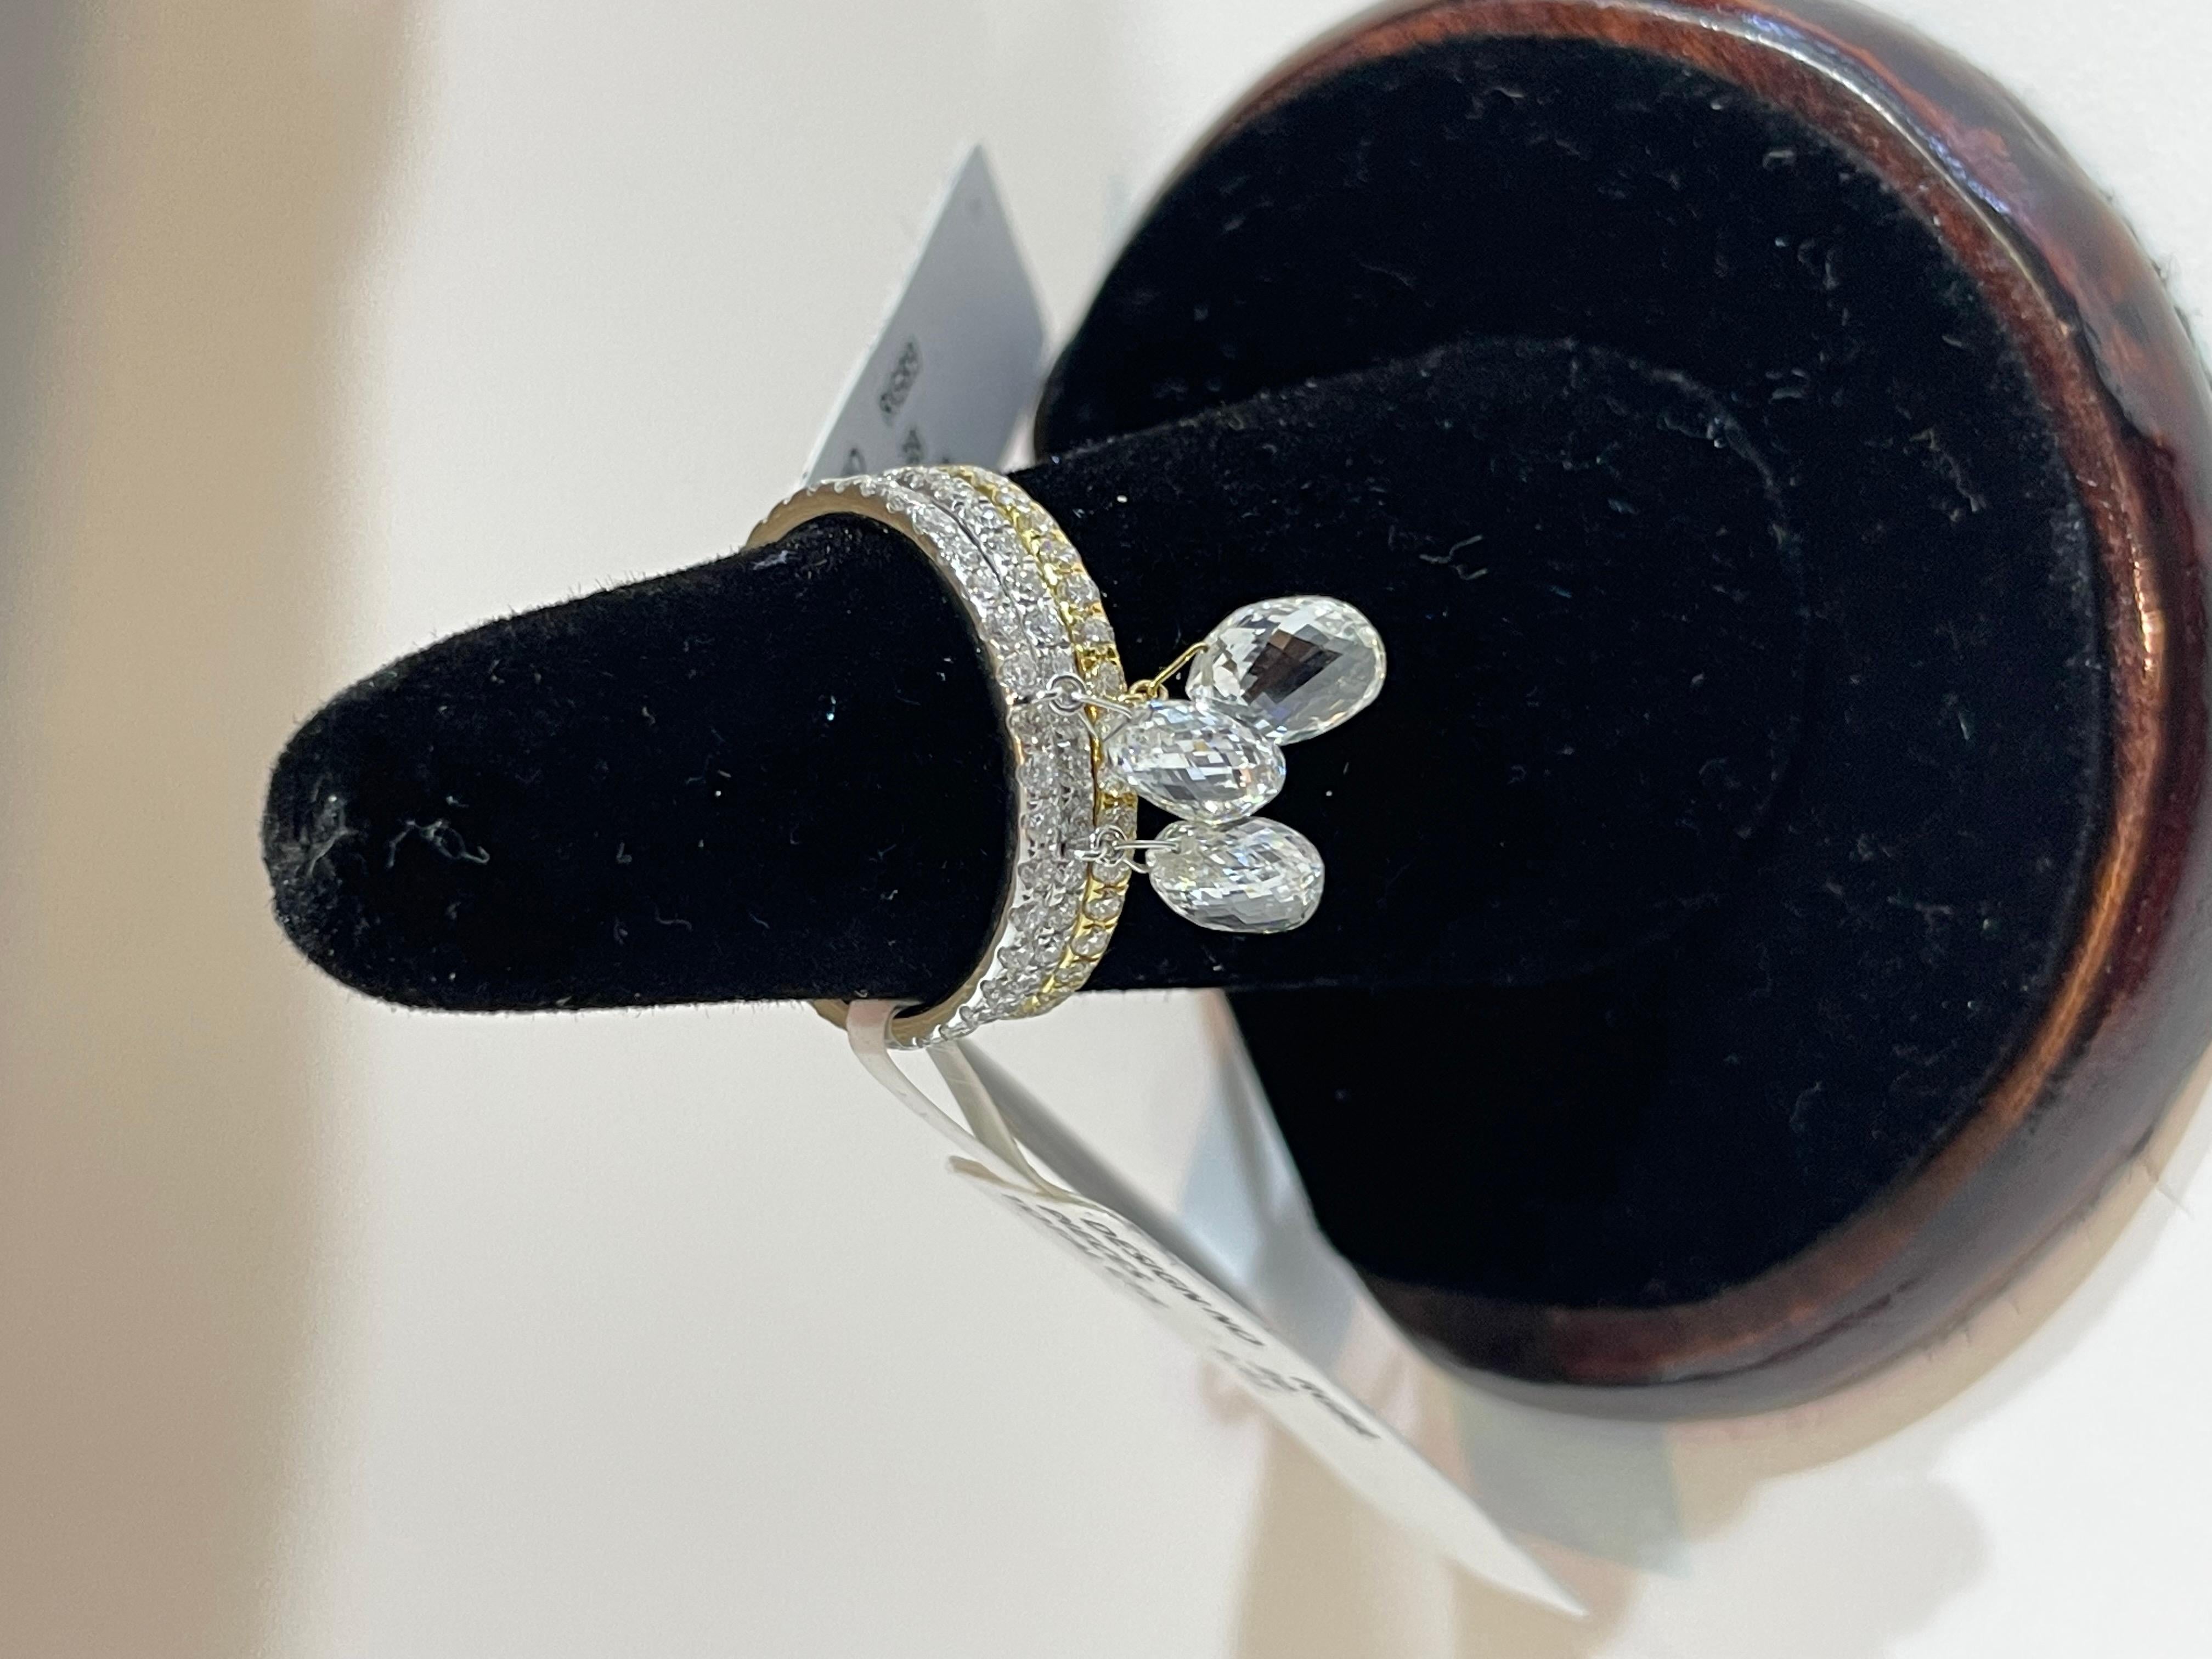 PANIM 1 Carat Briolette Diamond Dangling Ring 18 Karat White Gold

Inspired by the beauty of a rain drop, Our Briolette Dangling diamond ring is an absolute show-stopper.
It has 1 piece of Rain Drops White Diamond Briolettes with diamond band having